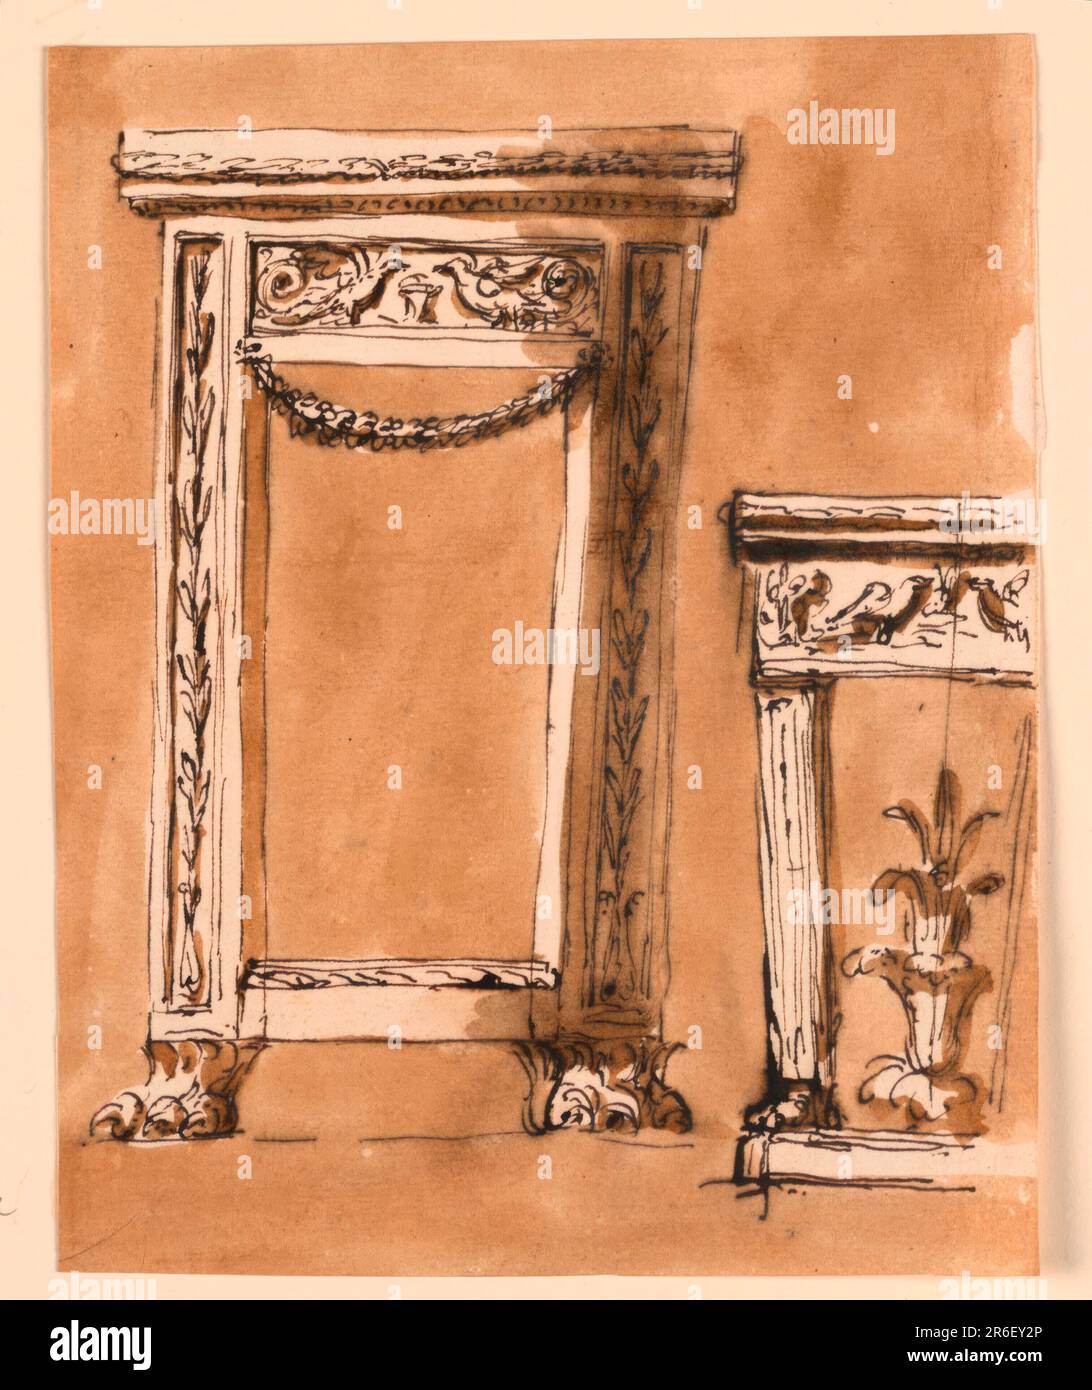 At left: like -2058, with slight variations of the decoration. At right: a left side. Supported by a pillar with a lion's foot upon a base. The front of the frame and the top are an entablature, with the same bird motif in the frieze. From the center of the base rises an acanthus plant. Usual background. Date: ca. 1795. Pen and brown ink, brush and brown wash on off-white laid paper. Museum: Cooper Hewitt, Smithsonian Design Museum. Stock Photo